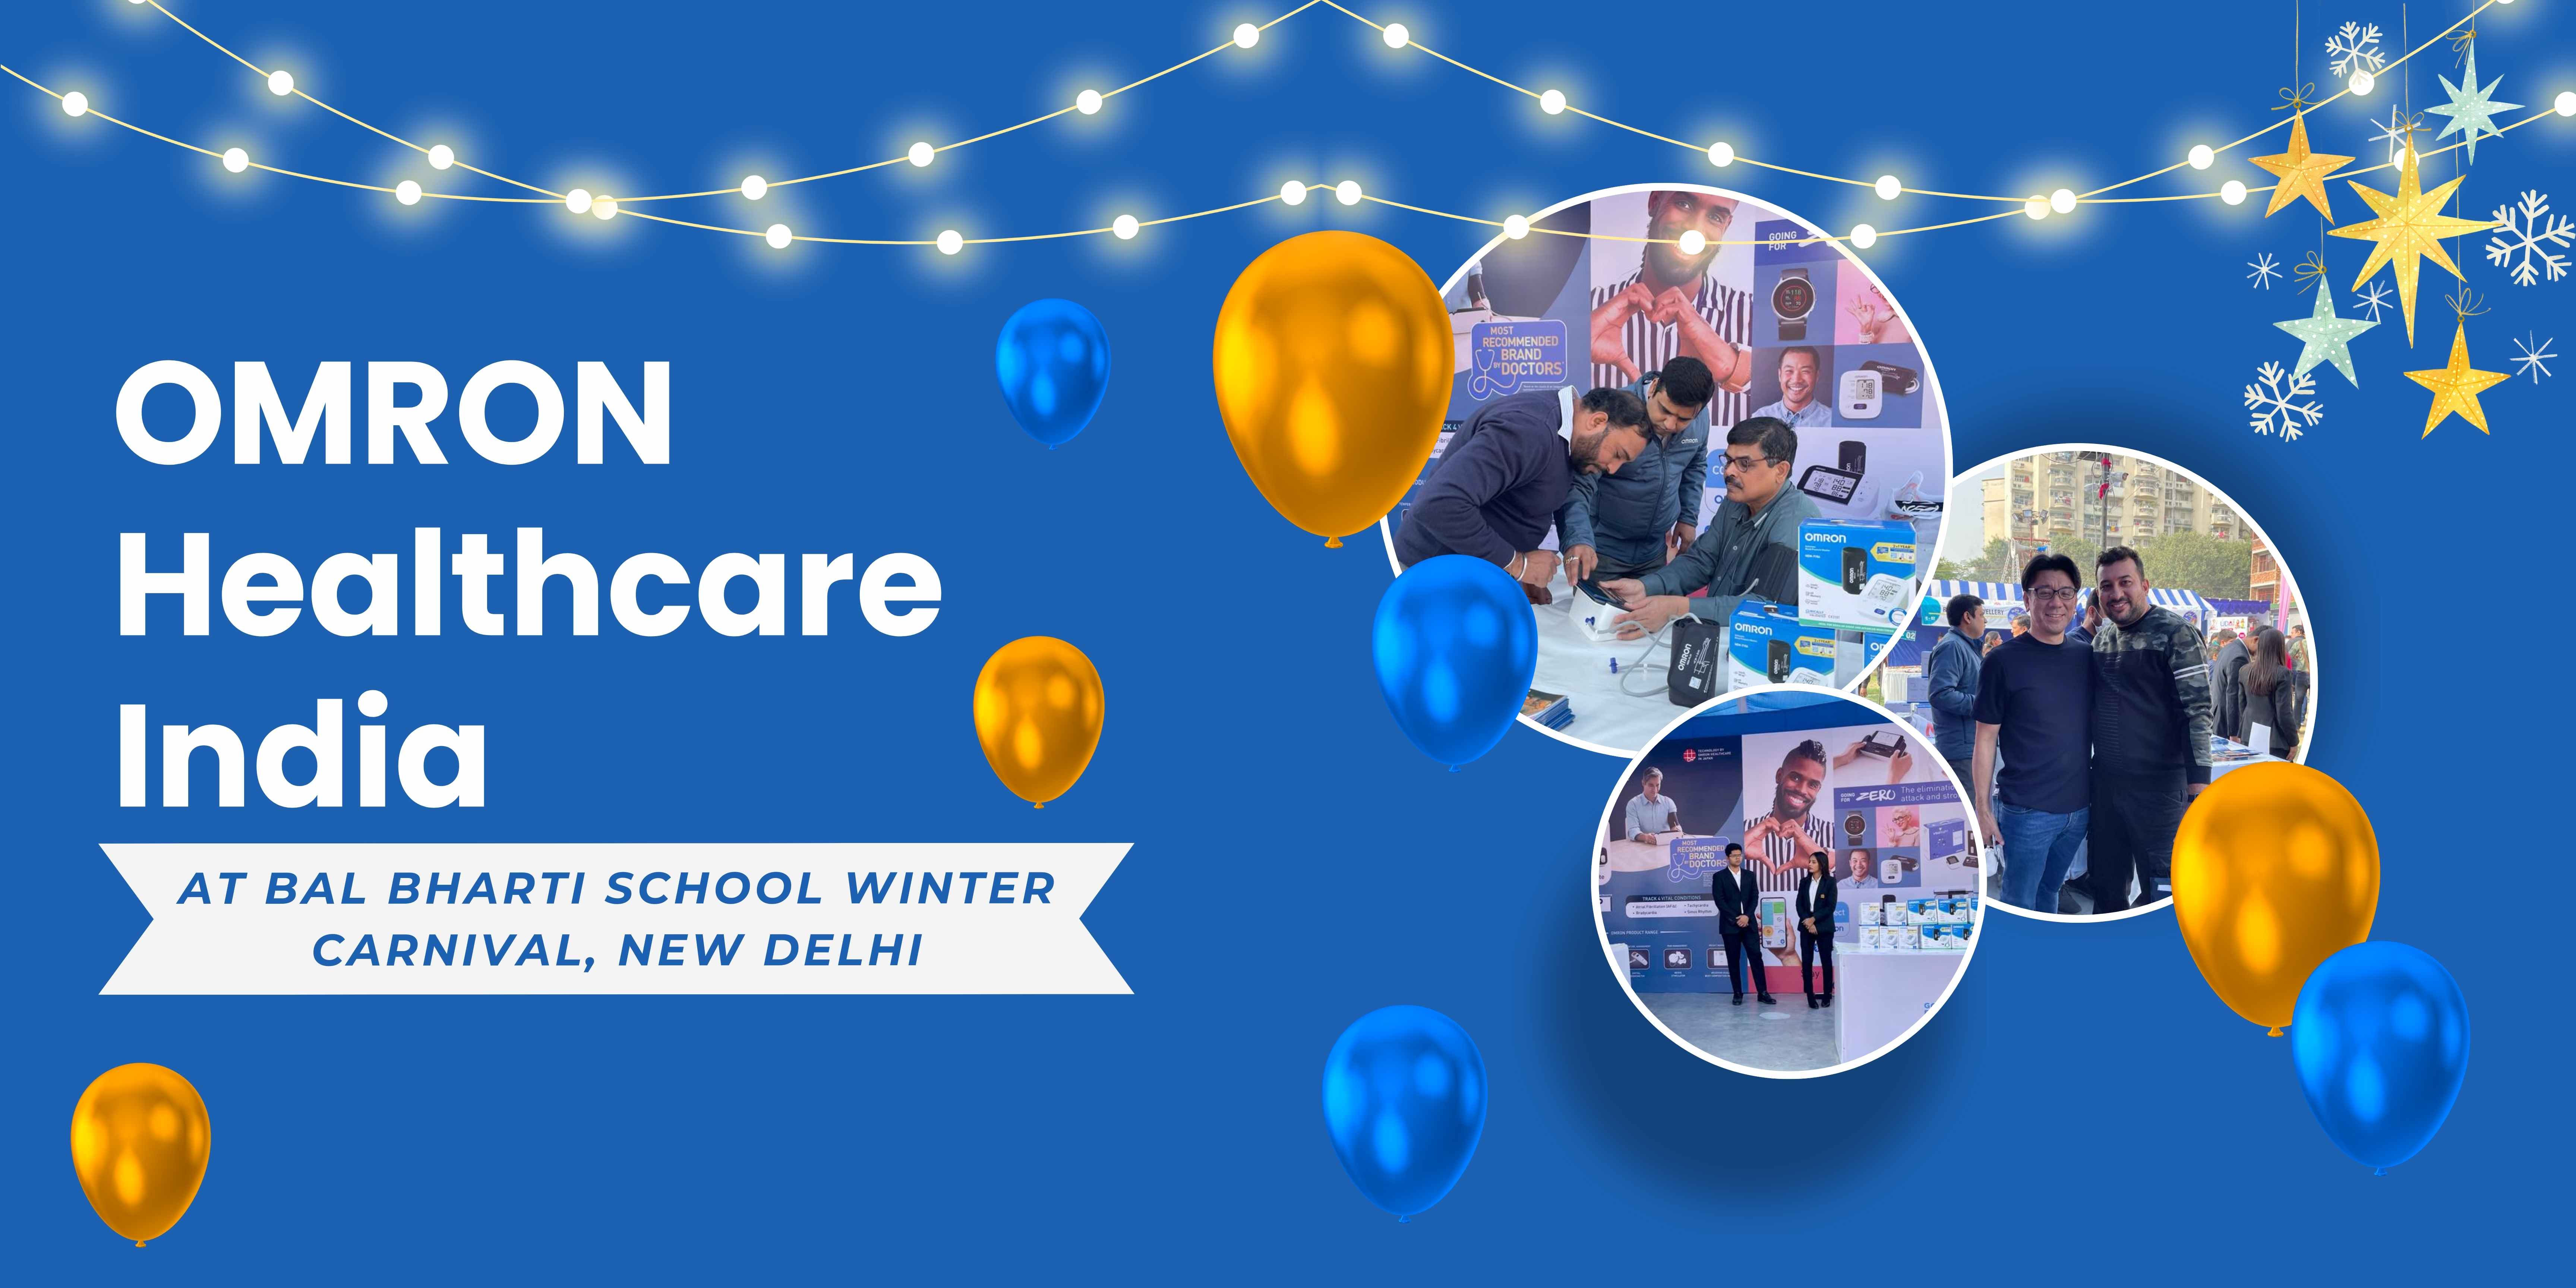 OMRON Healthcare India participates as a healthcare industry sponsor at the Bal Bharti School Winter Carnival